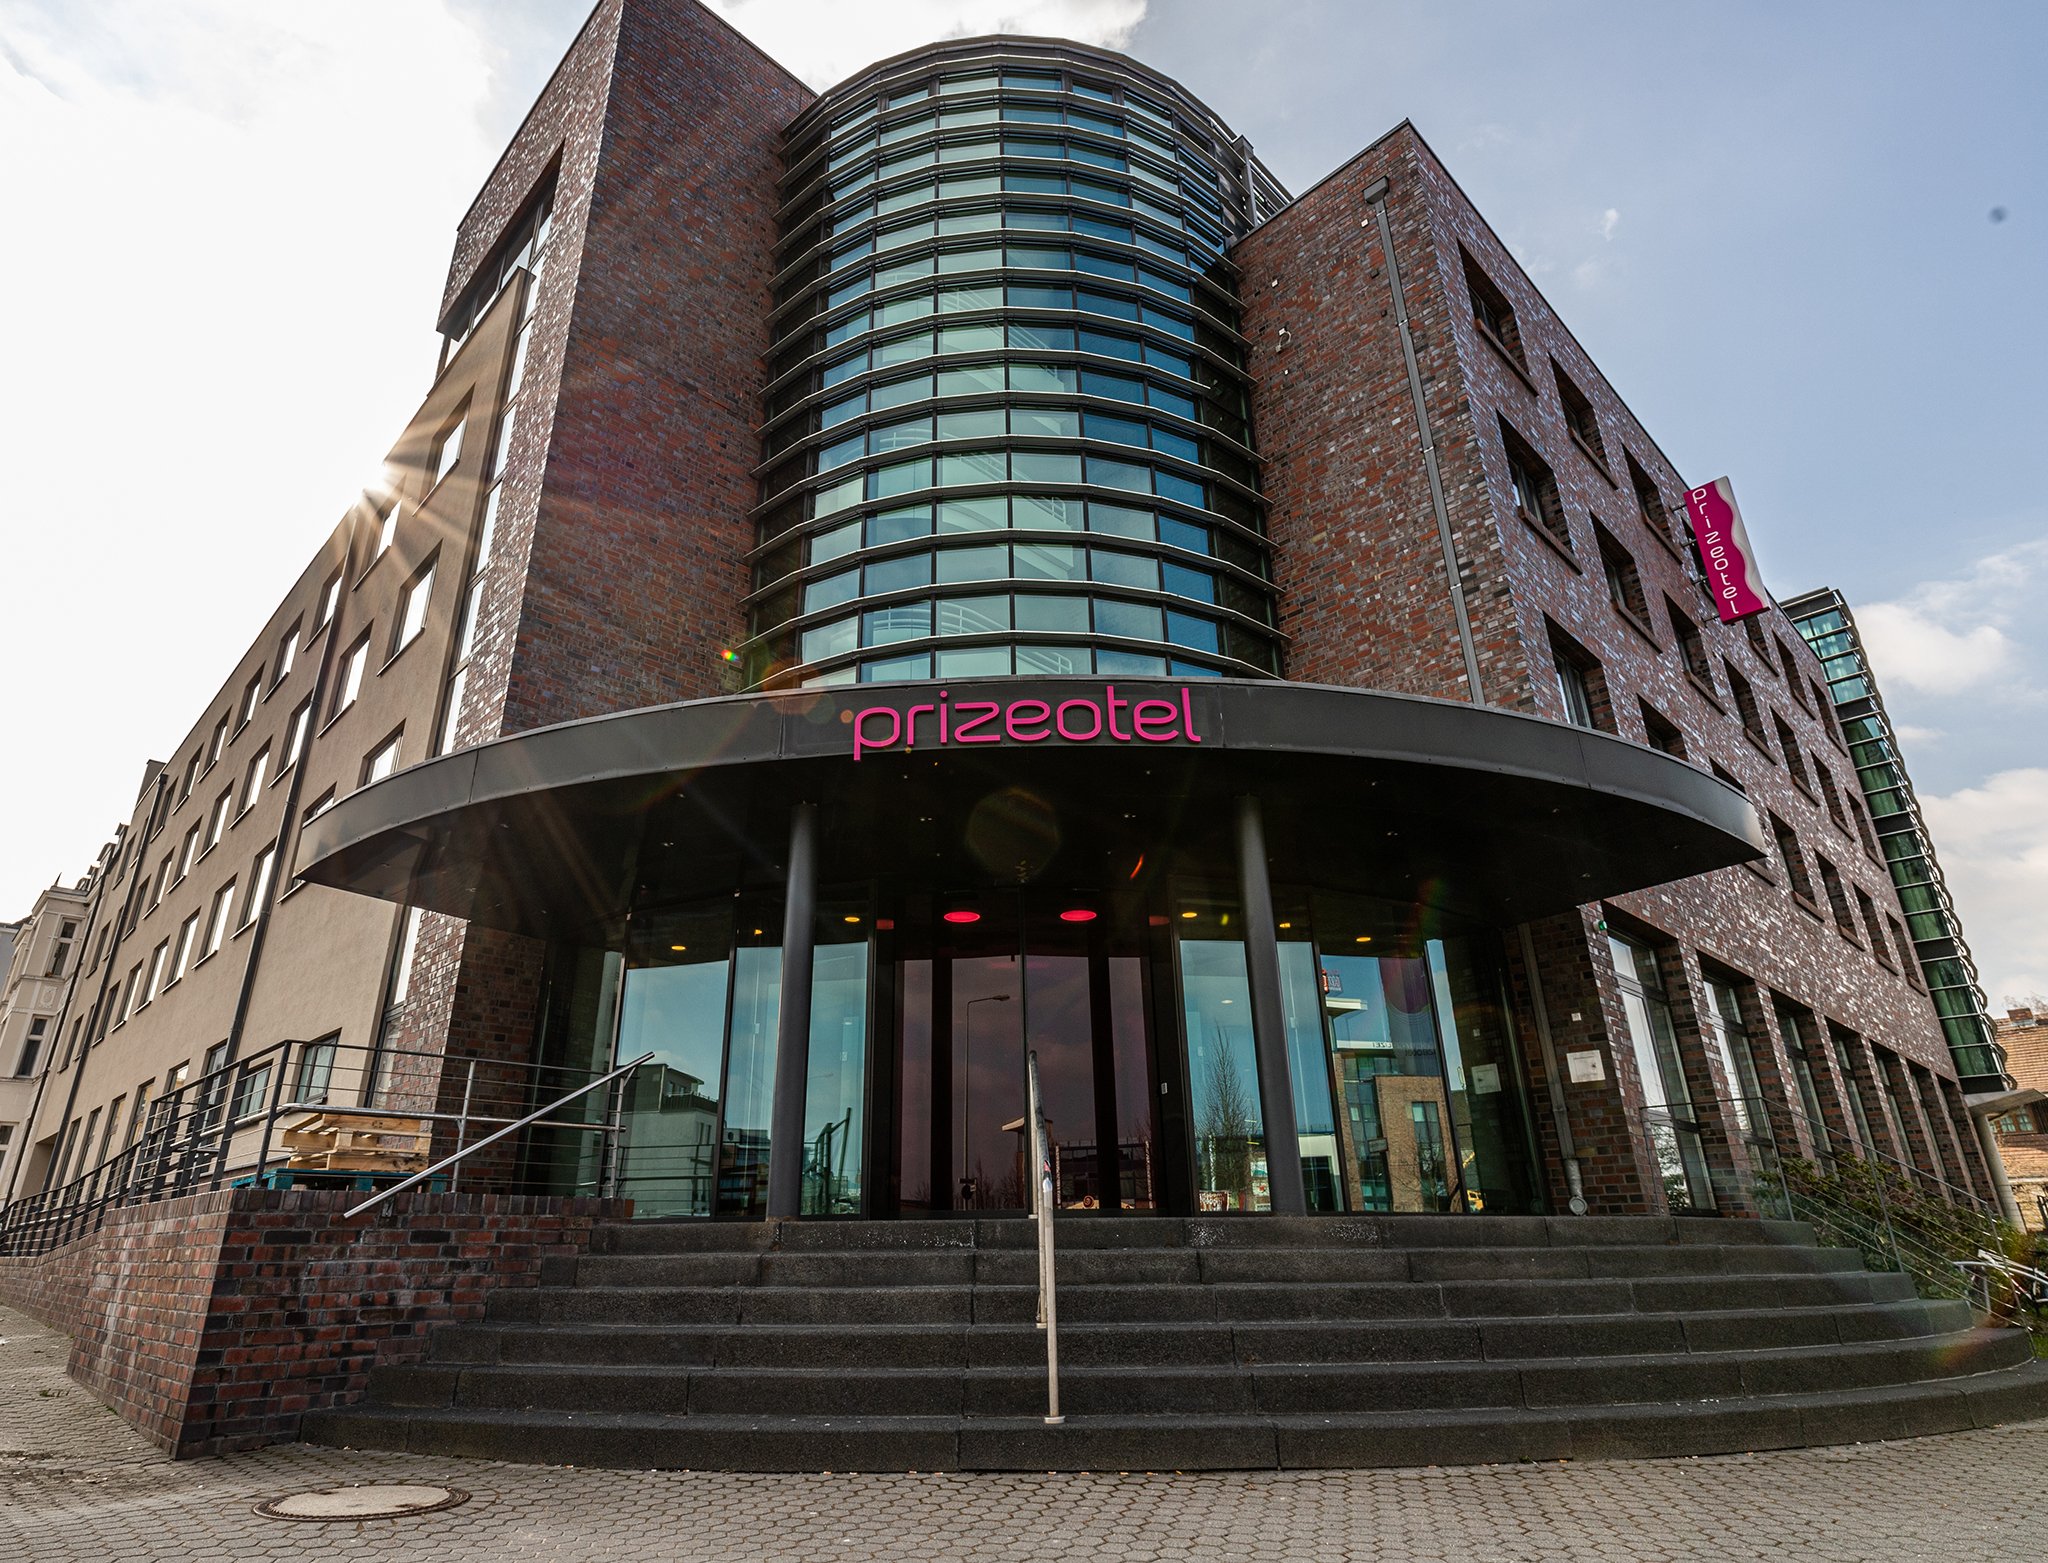 Photo of the entrance area and the exterior facade of the prizeotel in Rostock